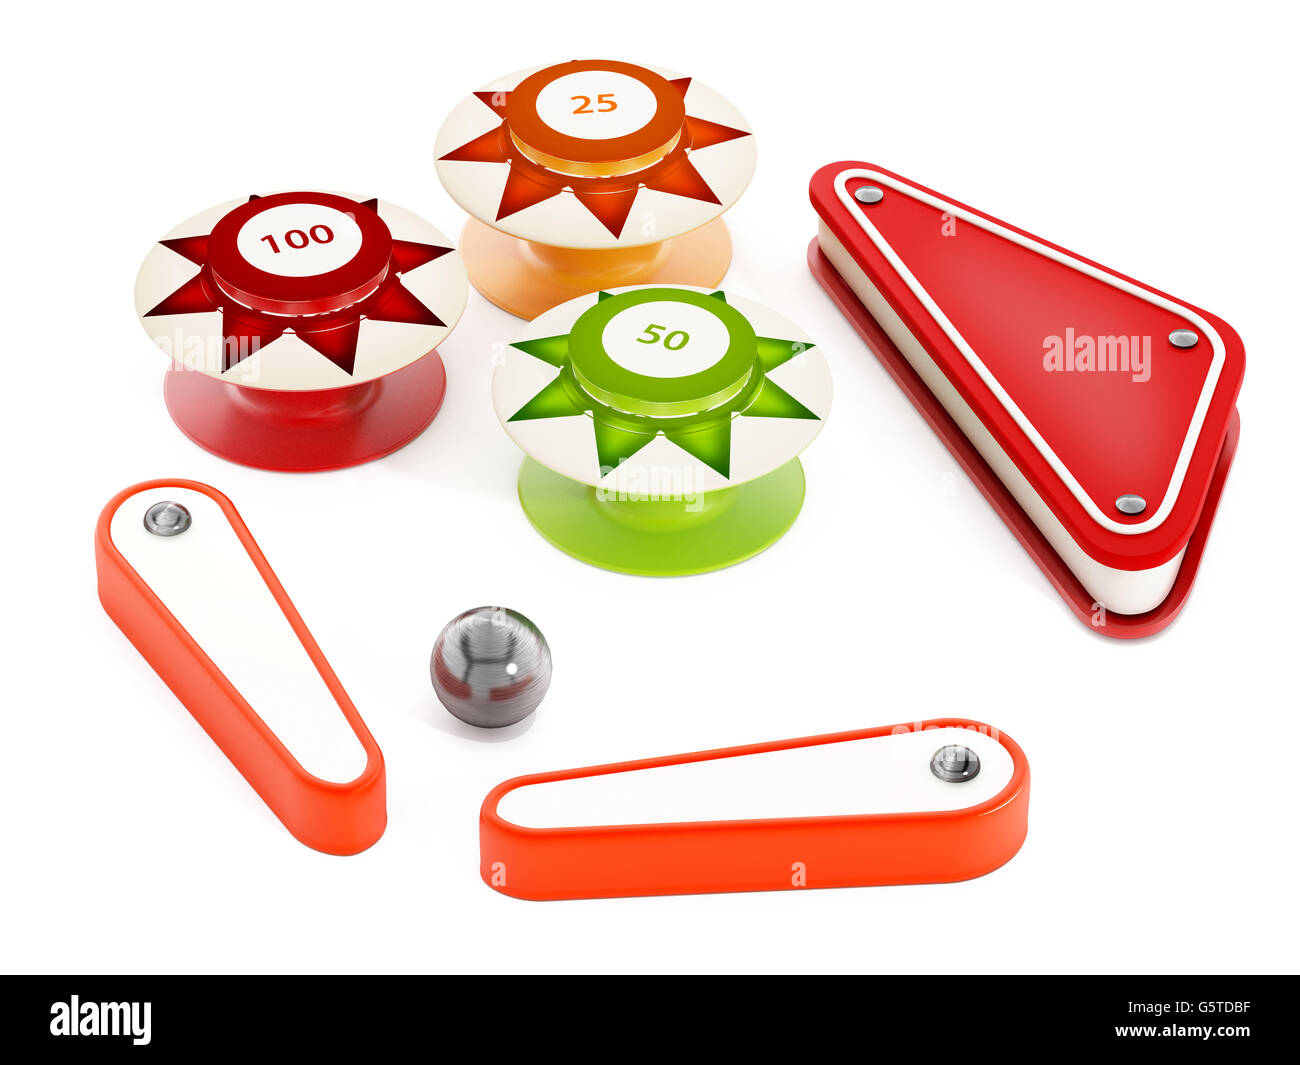 Pinball bumpers, flippers and metal ball on white background. 3D illustration. Stock Photo